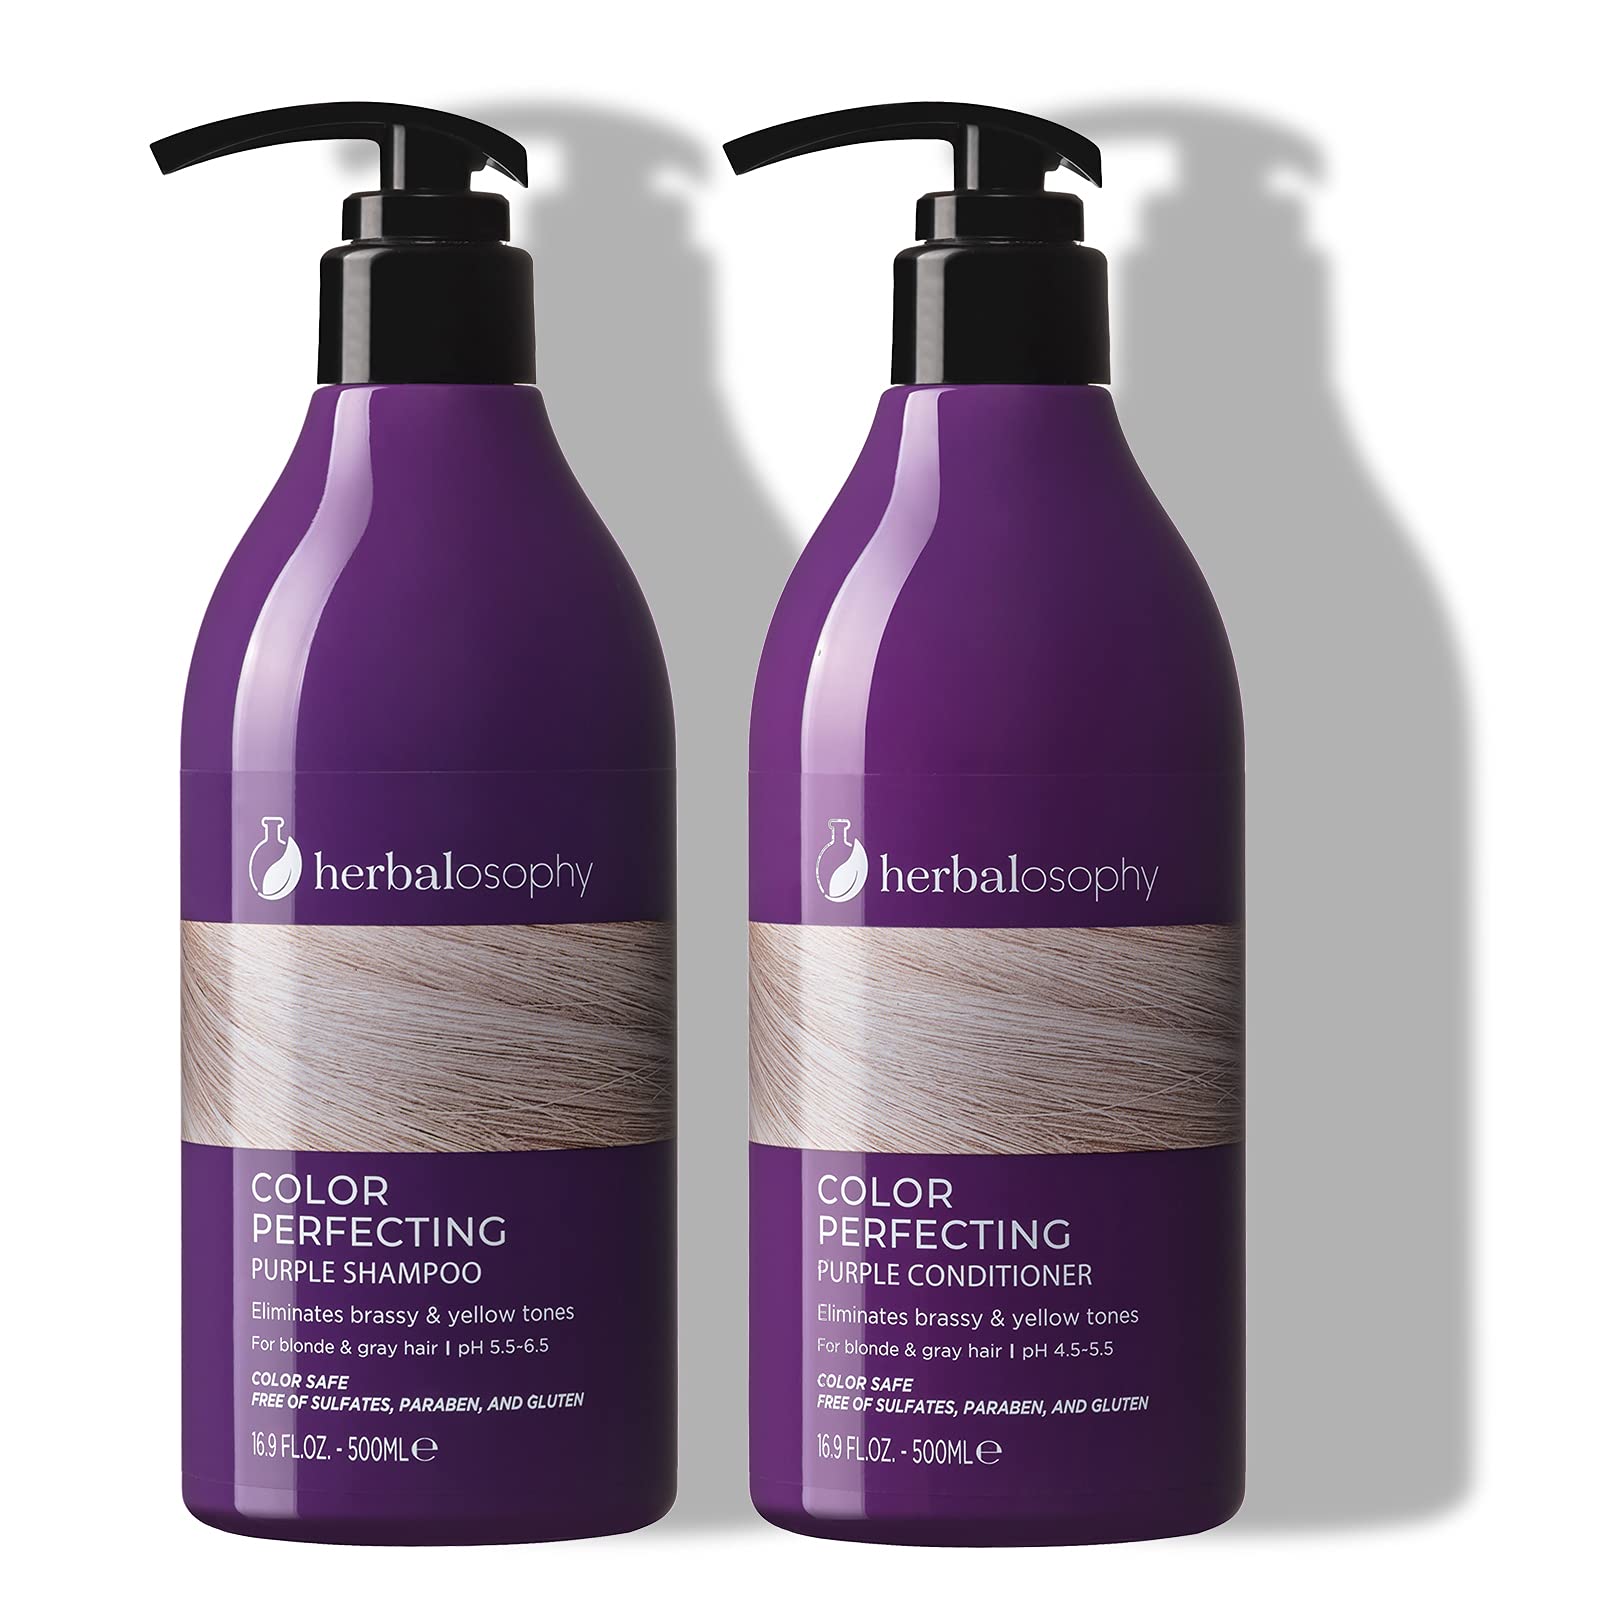 Herbalosophy Purple Shampoo  conditioner Set, Toning Shampoo conditioner for Blonde gray Hair, Eliminates Brassy and Yellow Tone